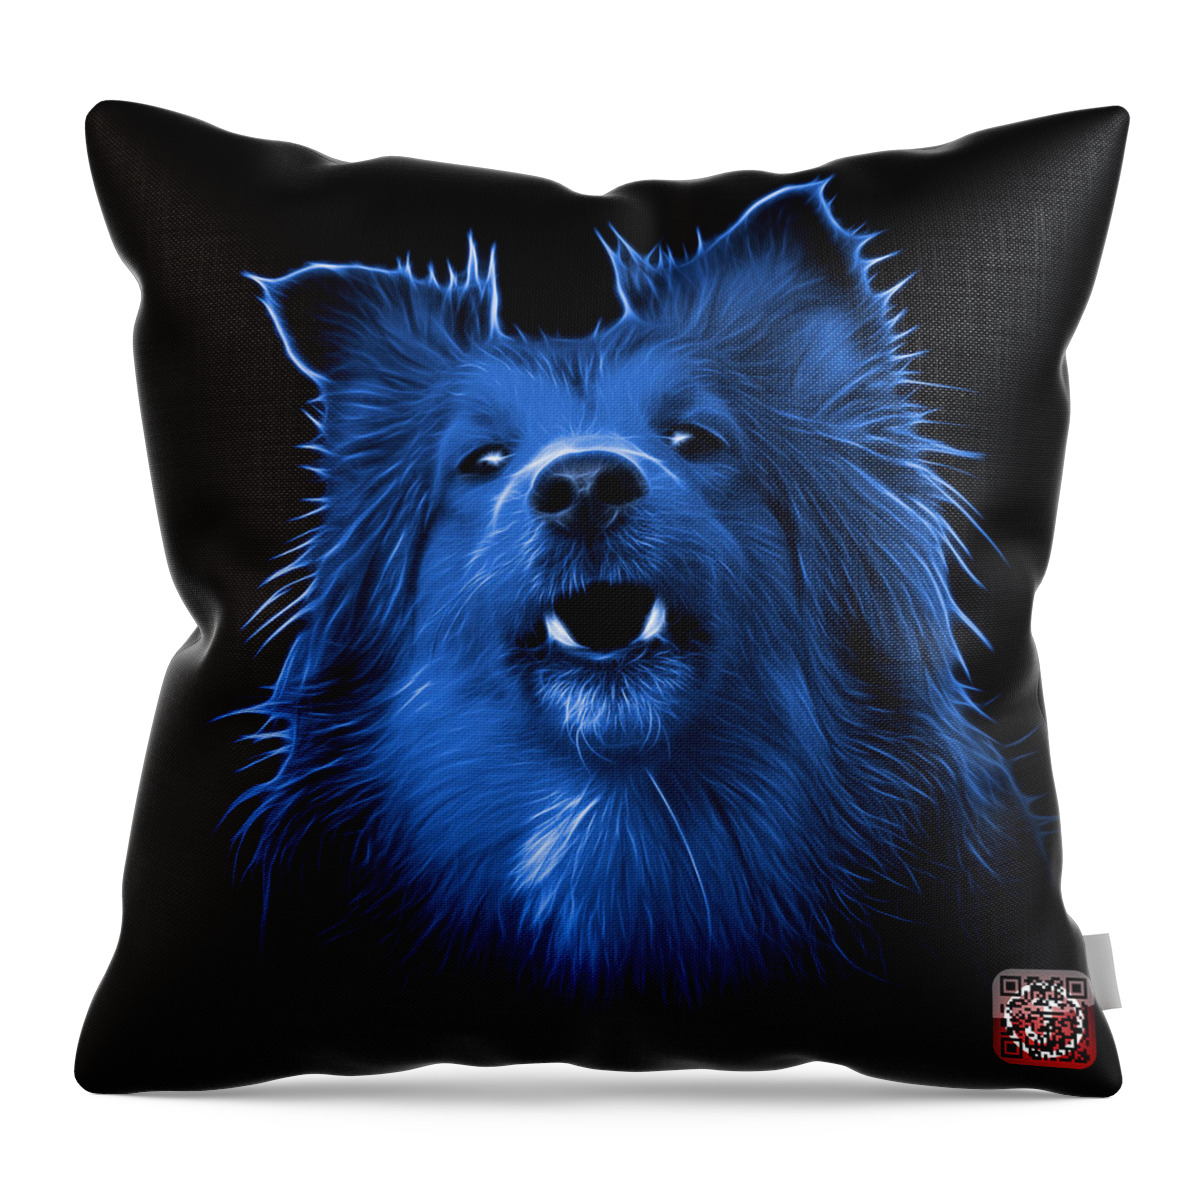 Sheltie Throw Pillow featuring the painting Blue Sheltie Dog Art 0207 - BB by James Ahn